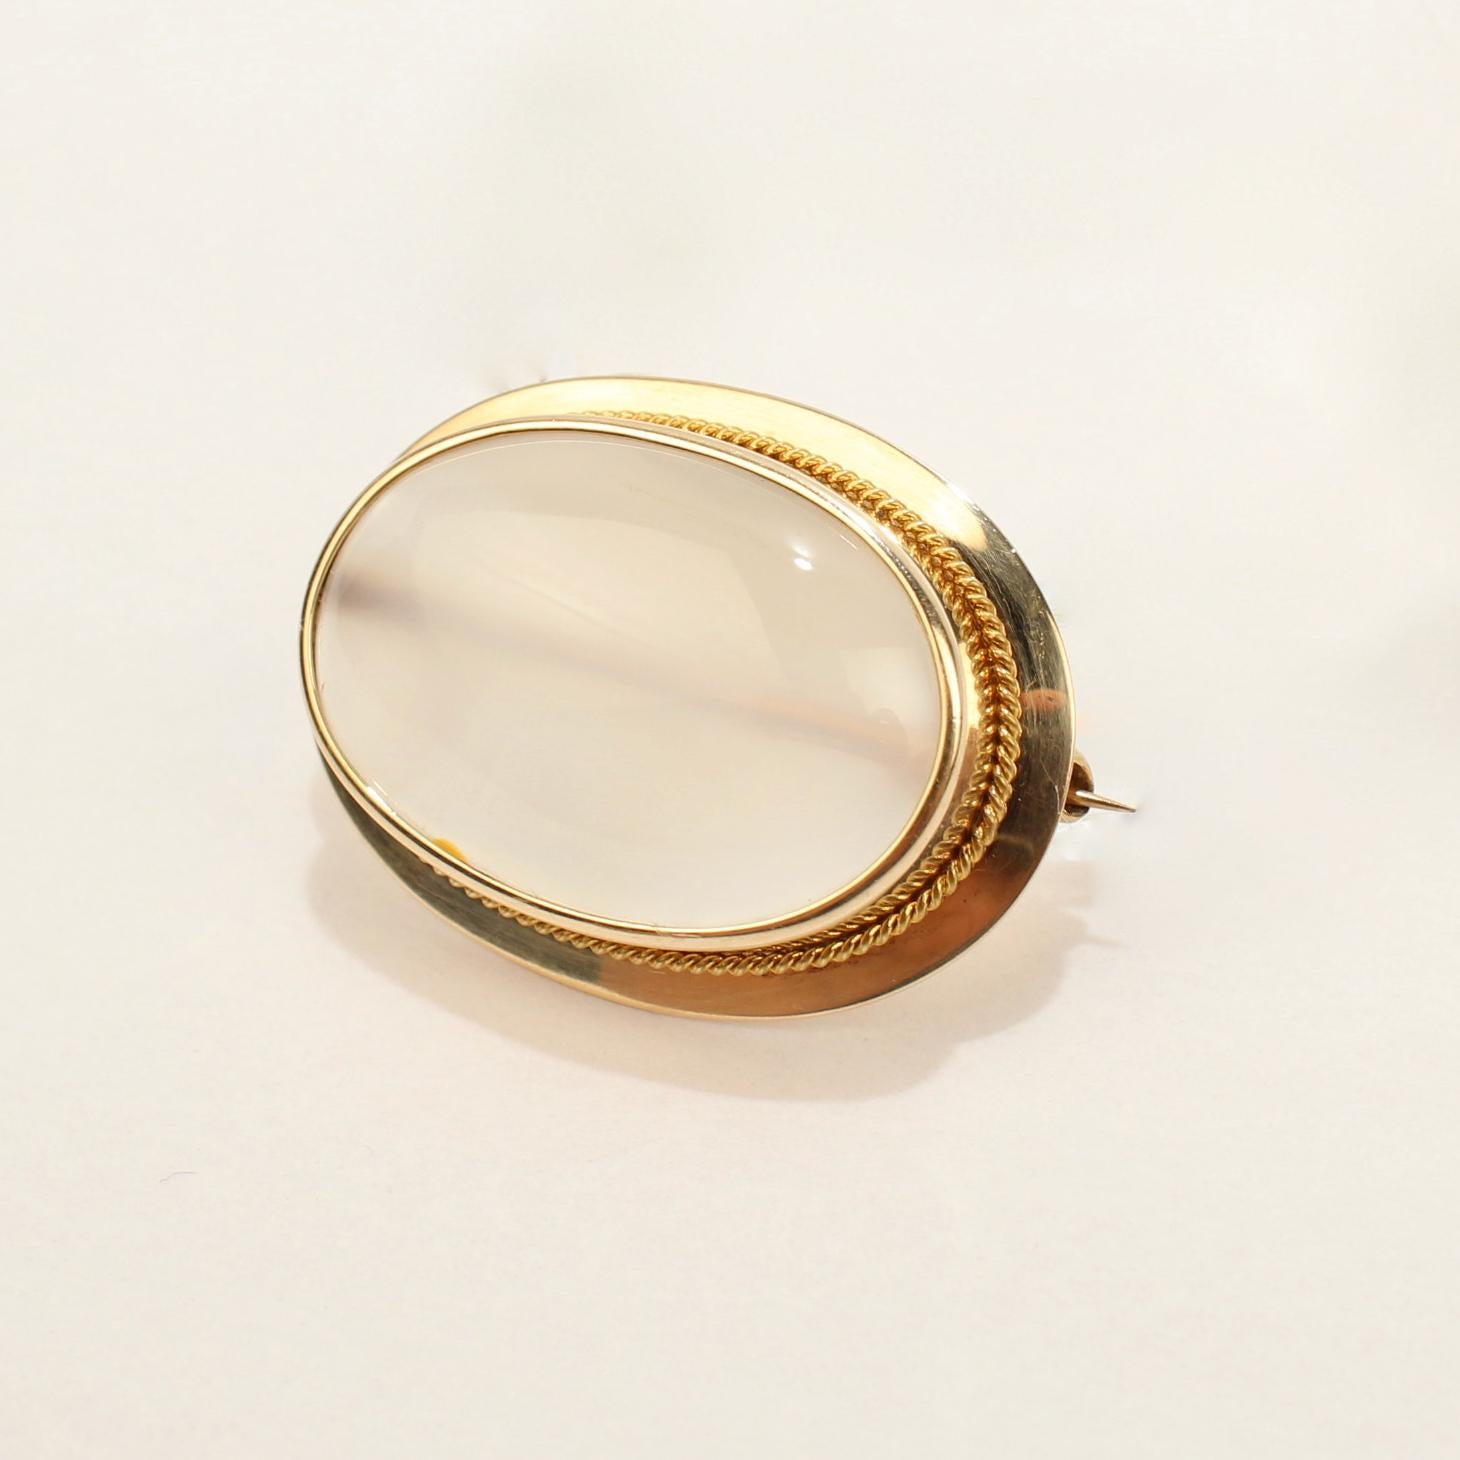 A fine vintage gold and moonstone cabochon brooch. 

With a large moonstone gemstone bezel set in 10k gold.

The finely polished moonstone cabochon has a lovely milky opacity and a small brown inclusion at 7 o'clock on the dial.

Simply a fine retro